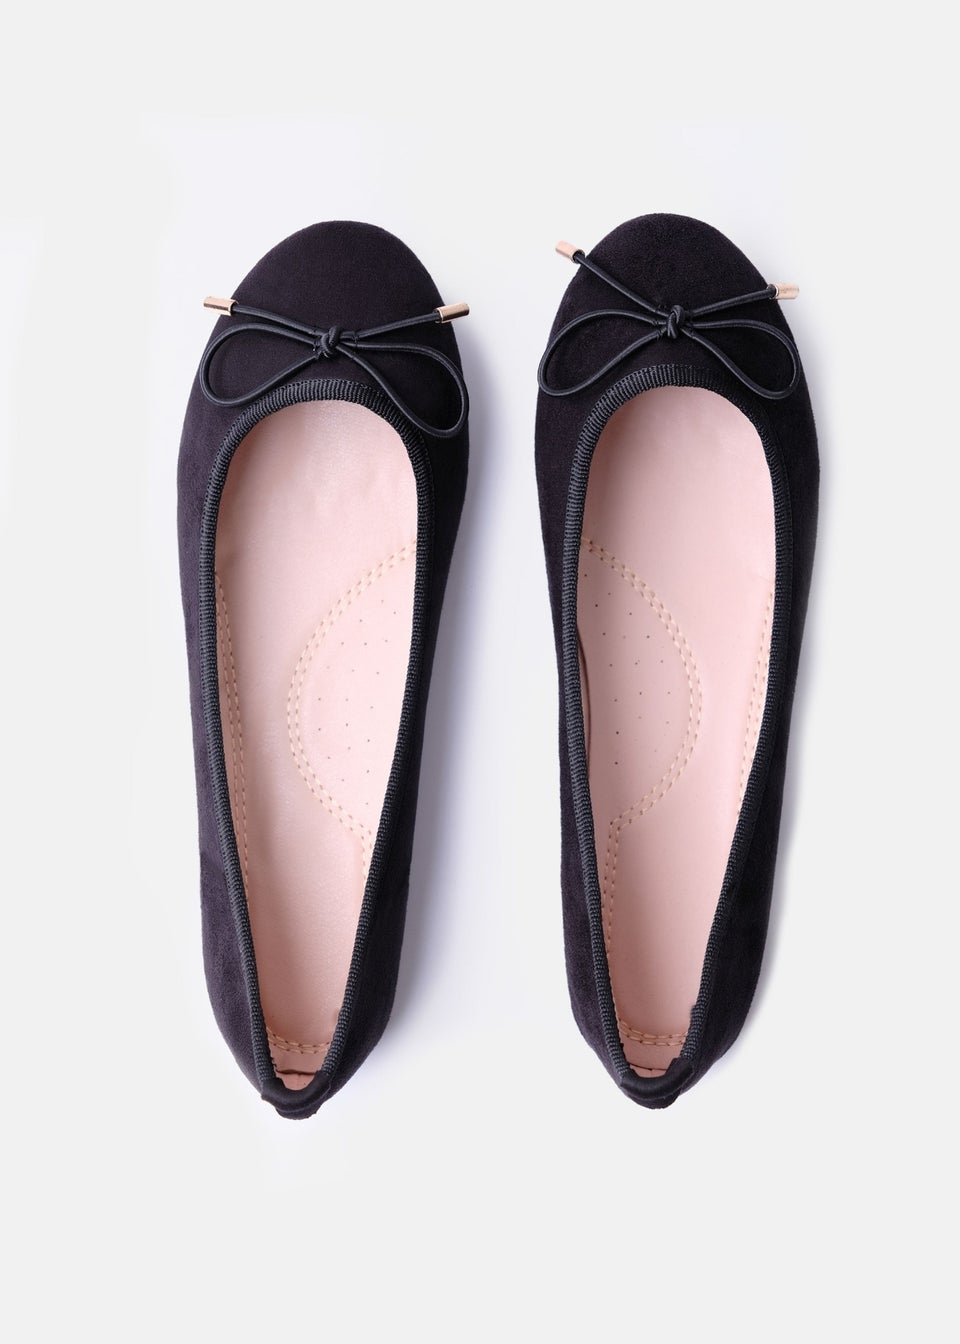 Where's That From Black Tallulah Wide Fit Suede Flat Pumps